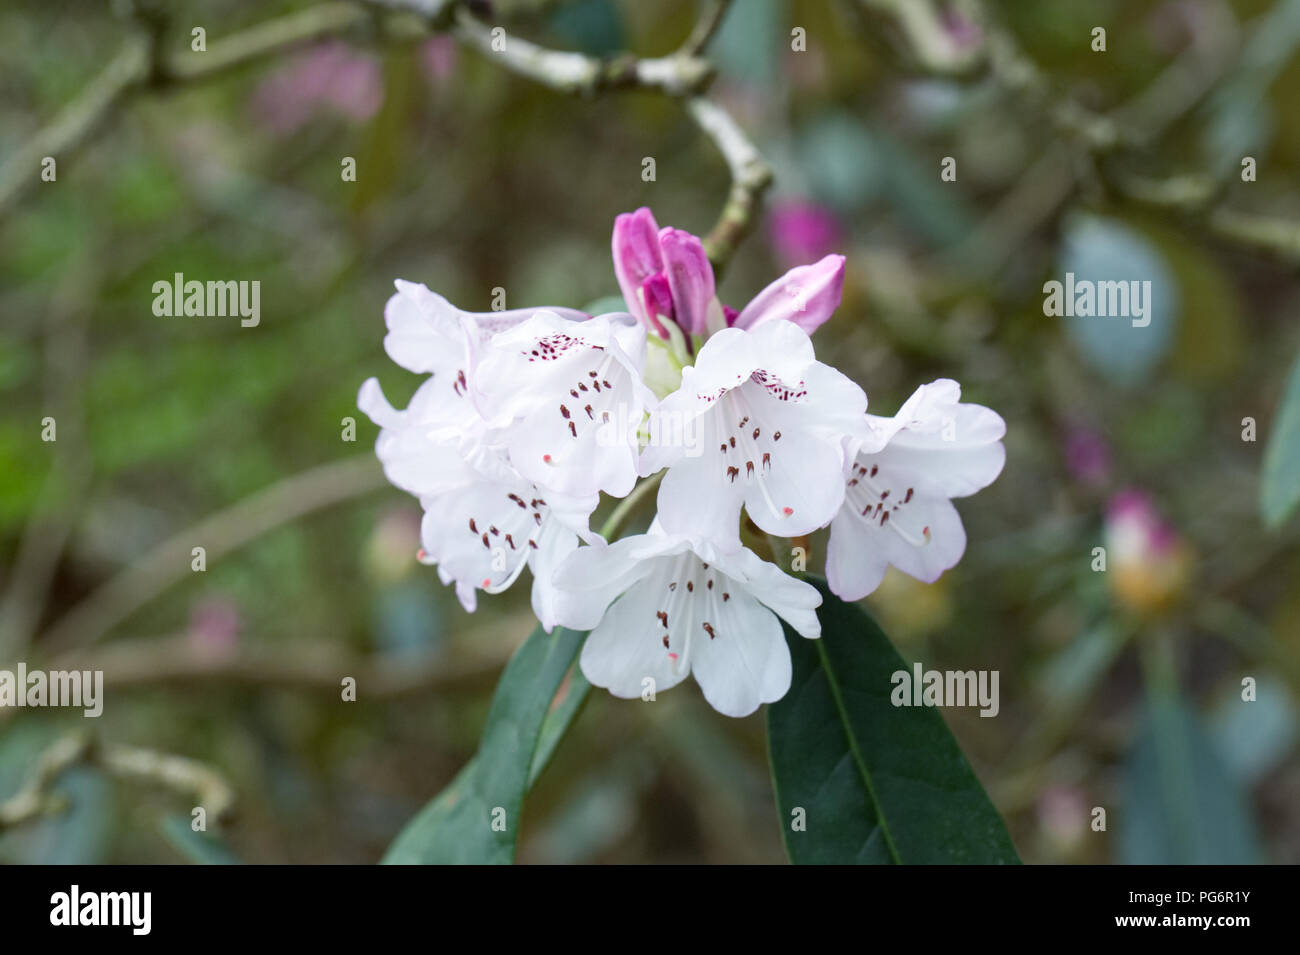 Rhododendron galactinum flowers. Stock Photo